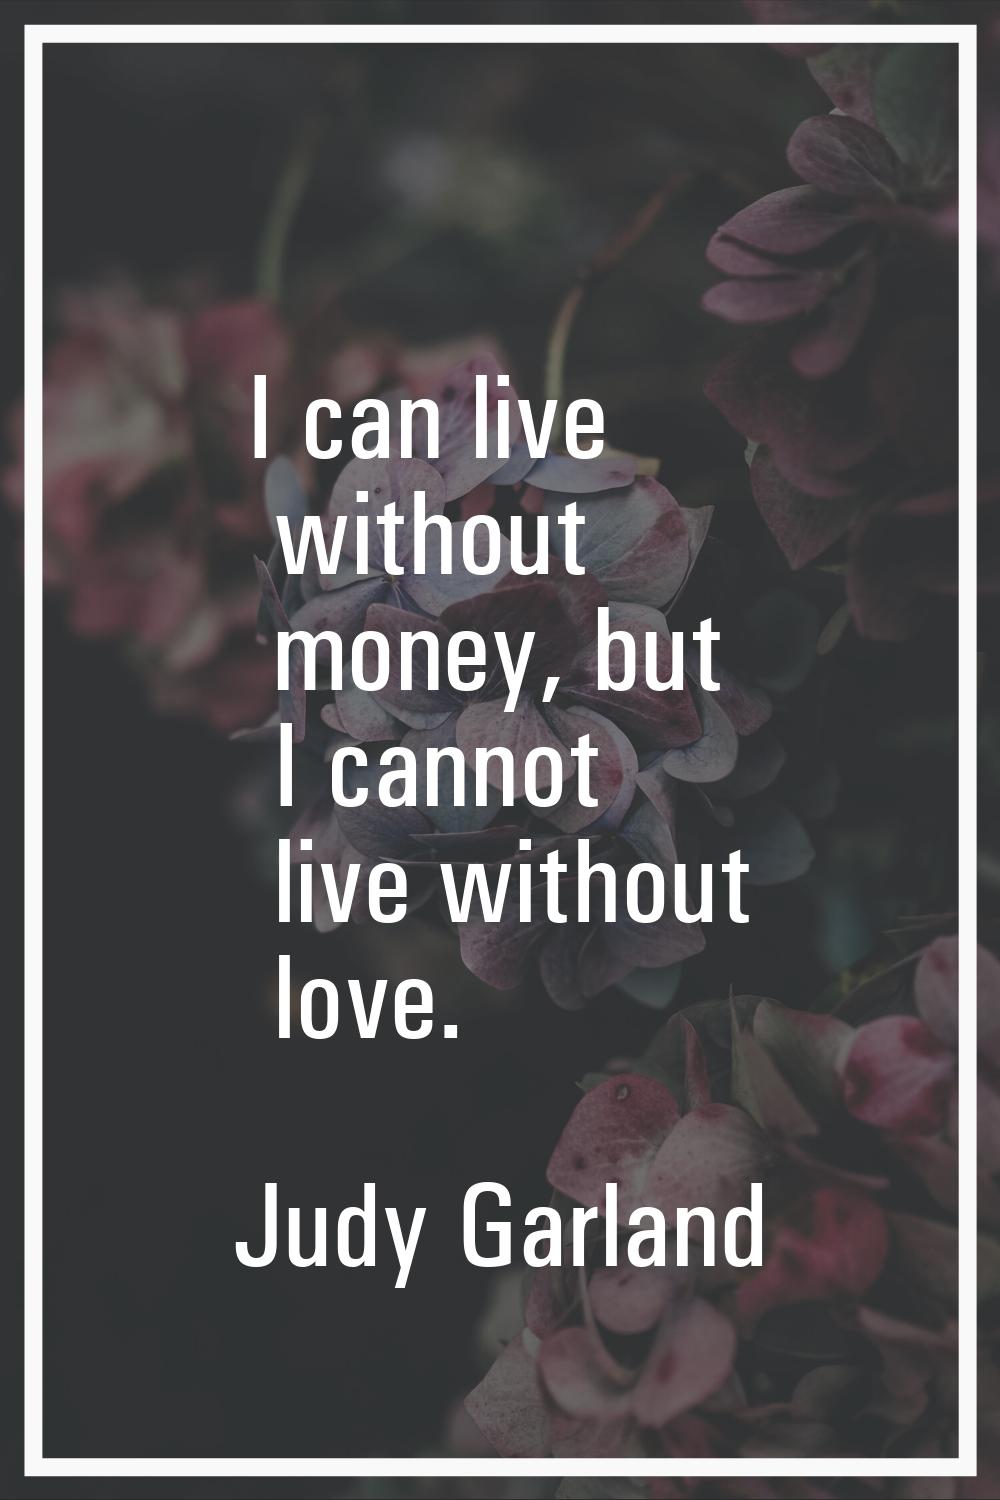 I can live without money, but I cannot live without love.